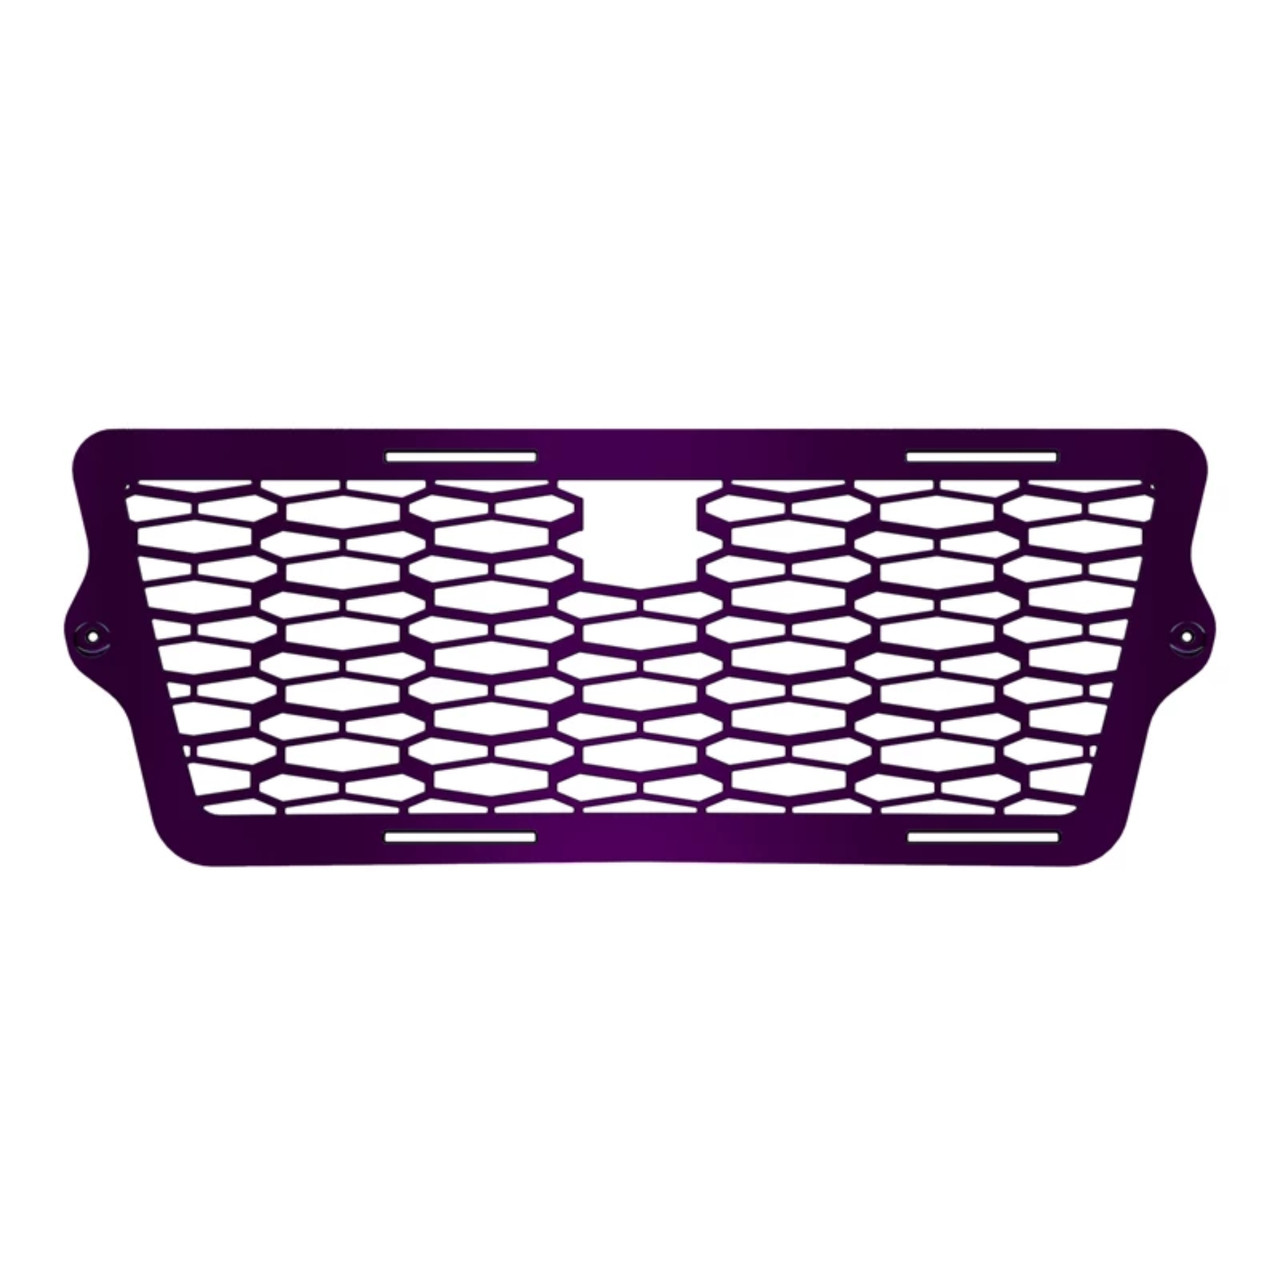 Polaris New OEM Painted Front Grille Midnight Purple, Slingshot, 2884148-381